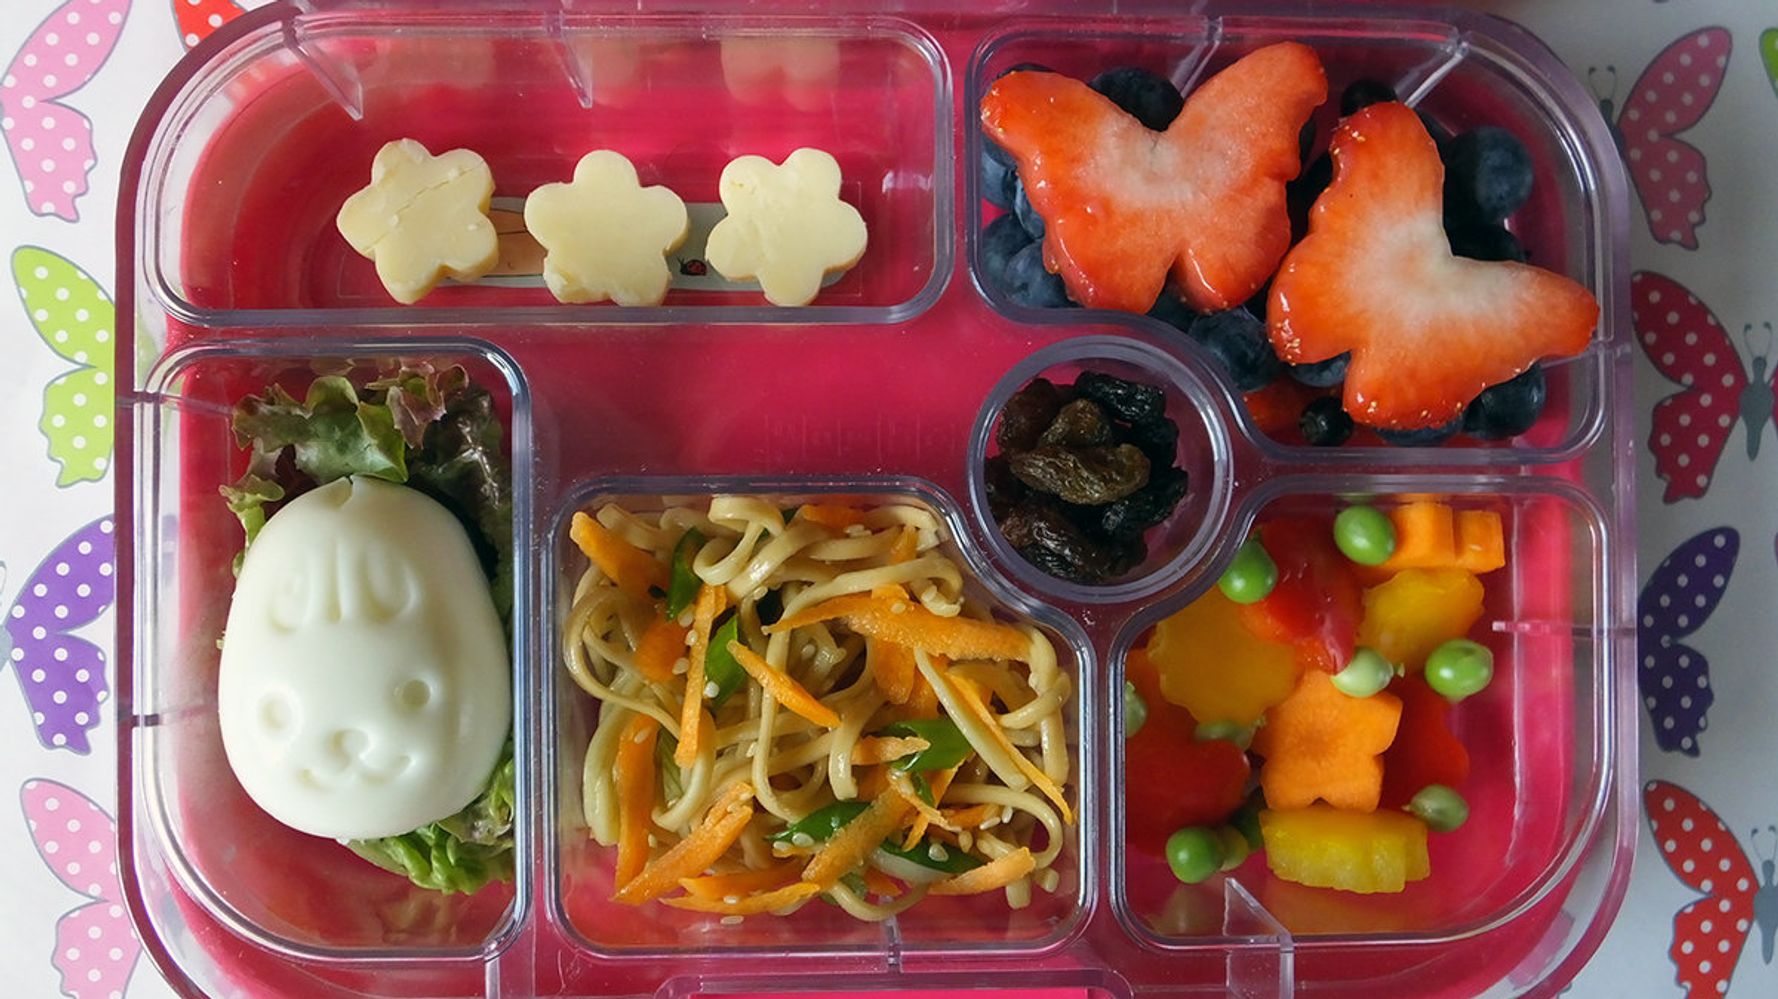 Healthy Packed Lunches Uk - Redis